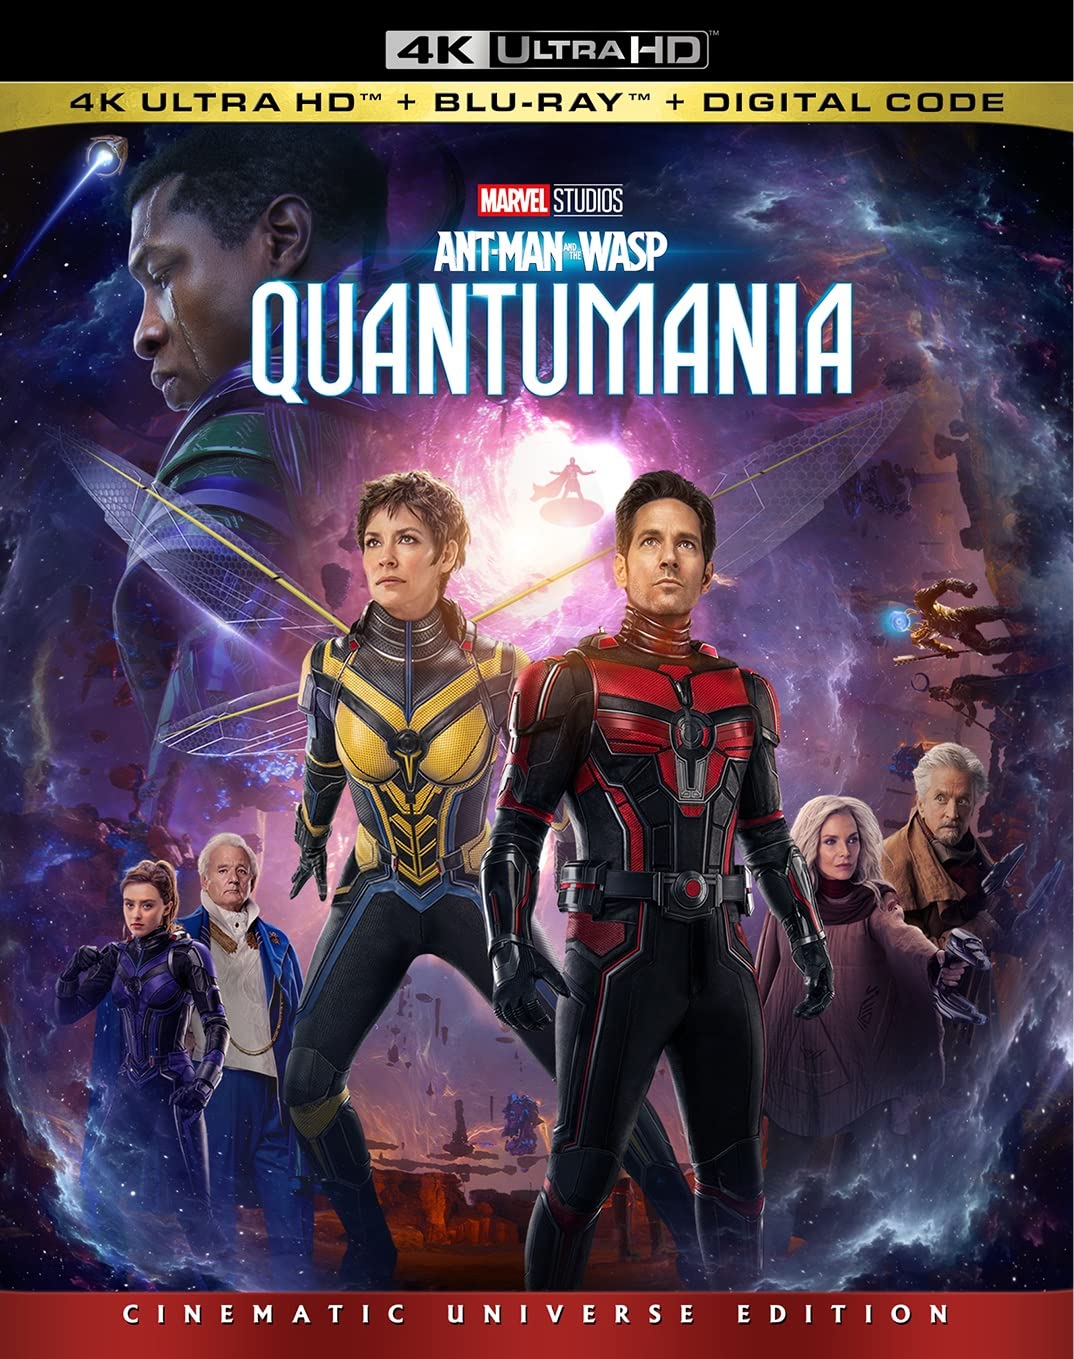 Ant-Man and the Wasp: Quantumania DVD Release Date May 16, 2023